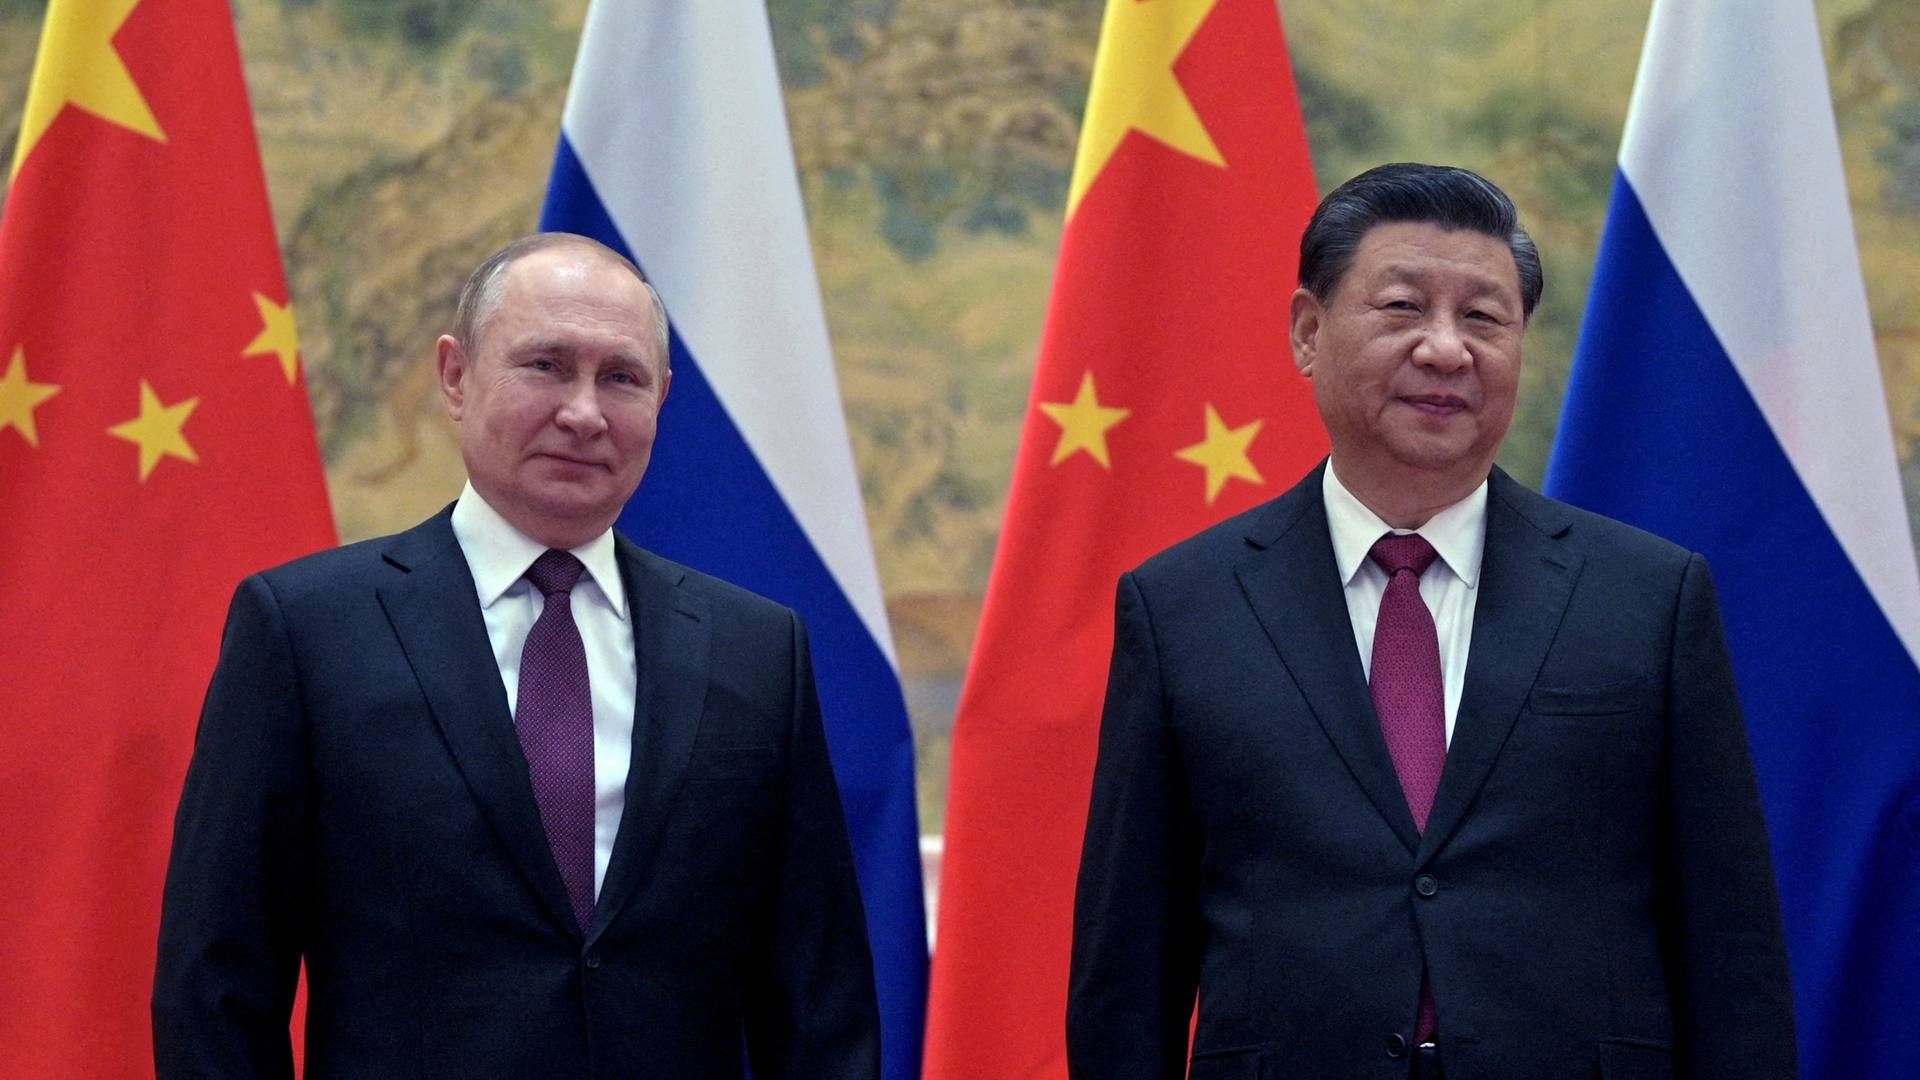 China’s President Xi Jinping’s friendship with Russian leader Vladimir Putin has made investors more distrustful of China, while a strongman narrative is gaining momentum as the Communist Party doggedly pursues a Covid-Zero strategy and unpredictable campaigns to regulate entire industries. | Photo: SPUTNIK/VIA REUTERS / X02440